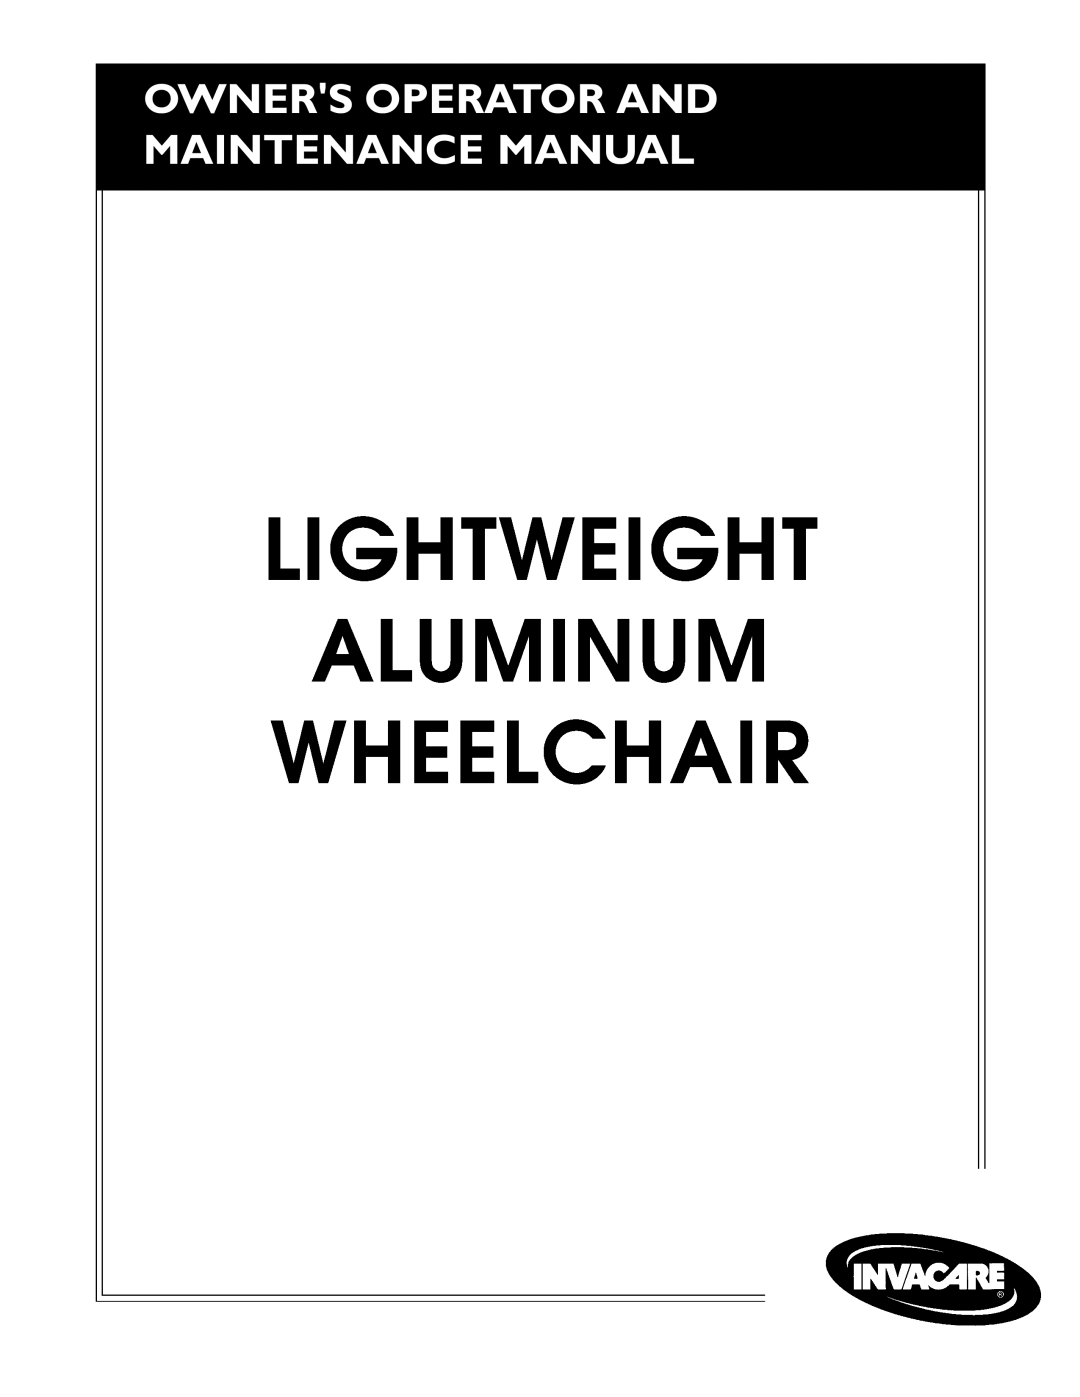 Invacare Lightweight Aluminum Wheelchair manual Owners Operator And Maintenance Manual 